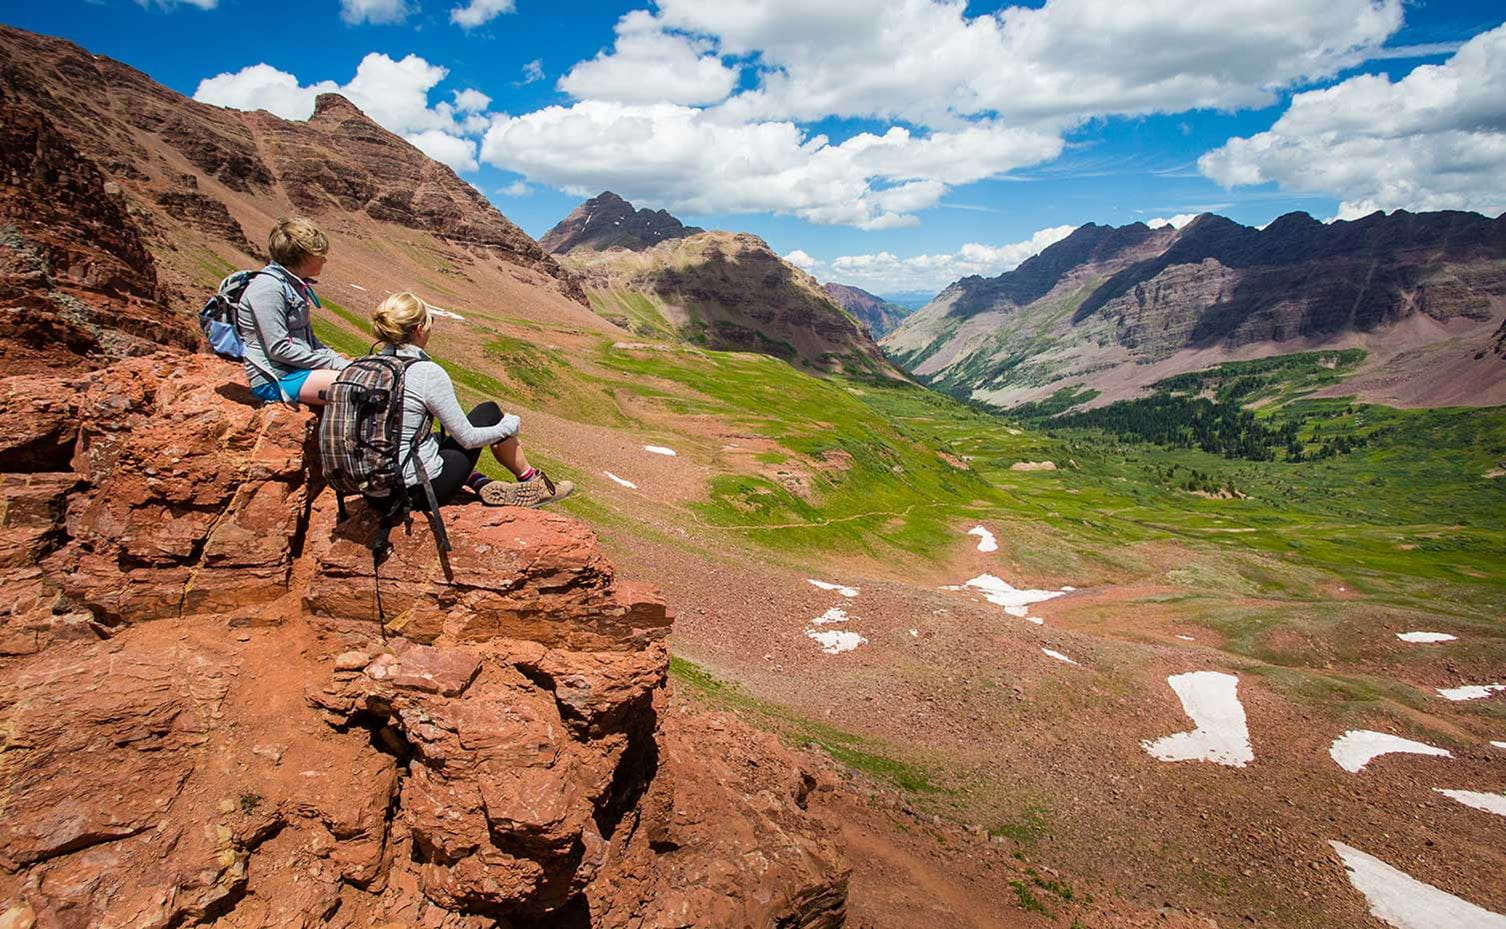 Hikers pause high above the Maroon Bells-Snowmass Wilderness